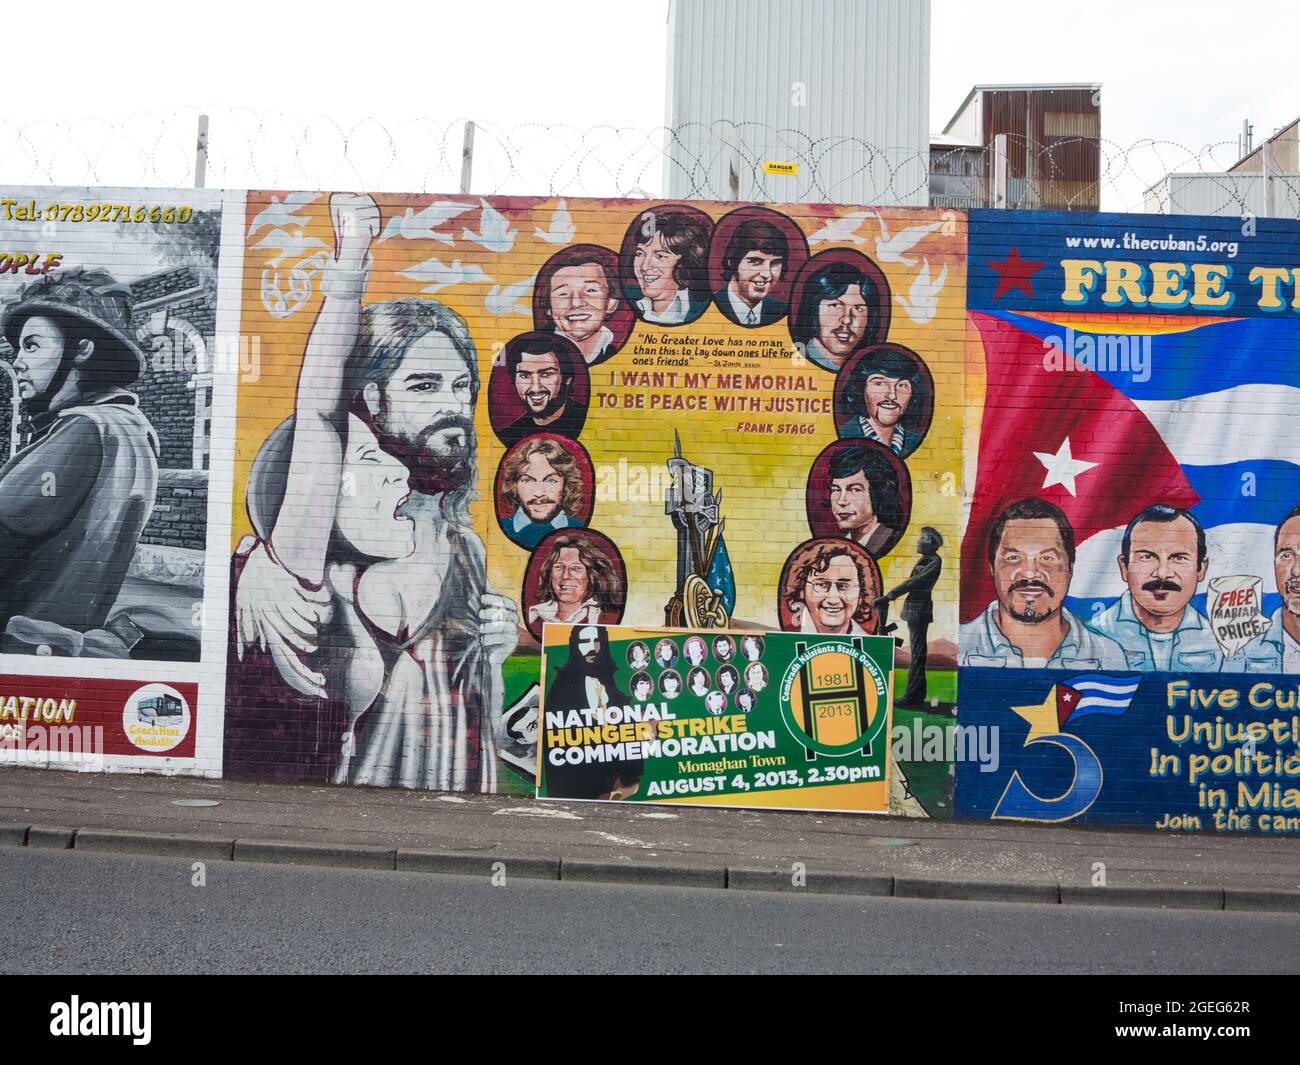 Belfast's murals are one of the city's major attractions and remind the world of its stormy past and the never-appeased resentment between nationalists and loyalists. The Gaeltacht Quarter, in West Belfast, is the area where there is the greatest concentration of murals. In the years of greater political tension, this neighborhood was a real battlefield: divided by different religious orientations already in the Victorian era, this area of ??workers' homes saw the exacerbation of tensions and resentment during the Troubles due to the Peace Line, created in 1970 to separate the loyalist and Pro Stock Photo